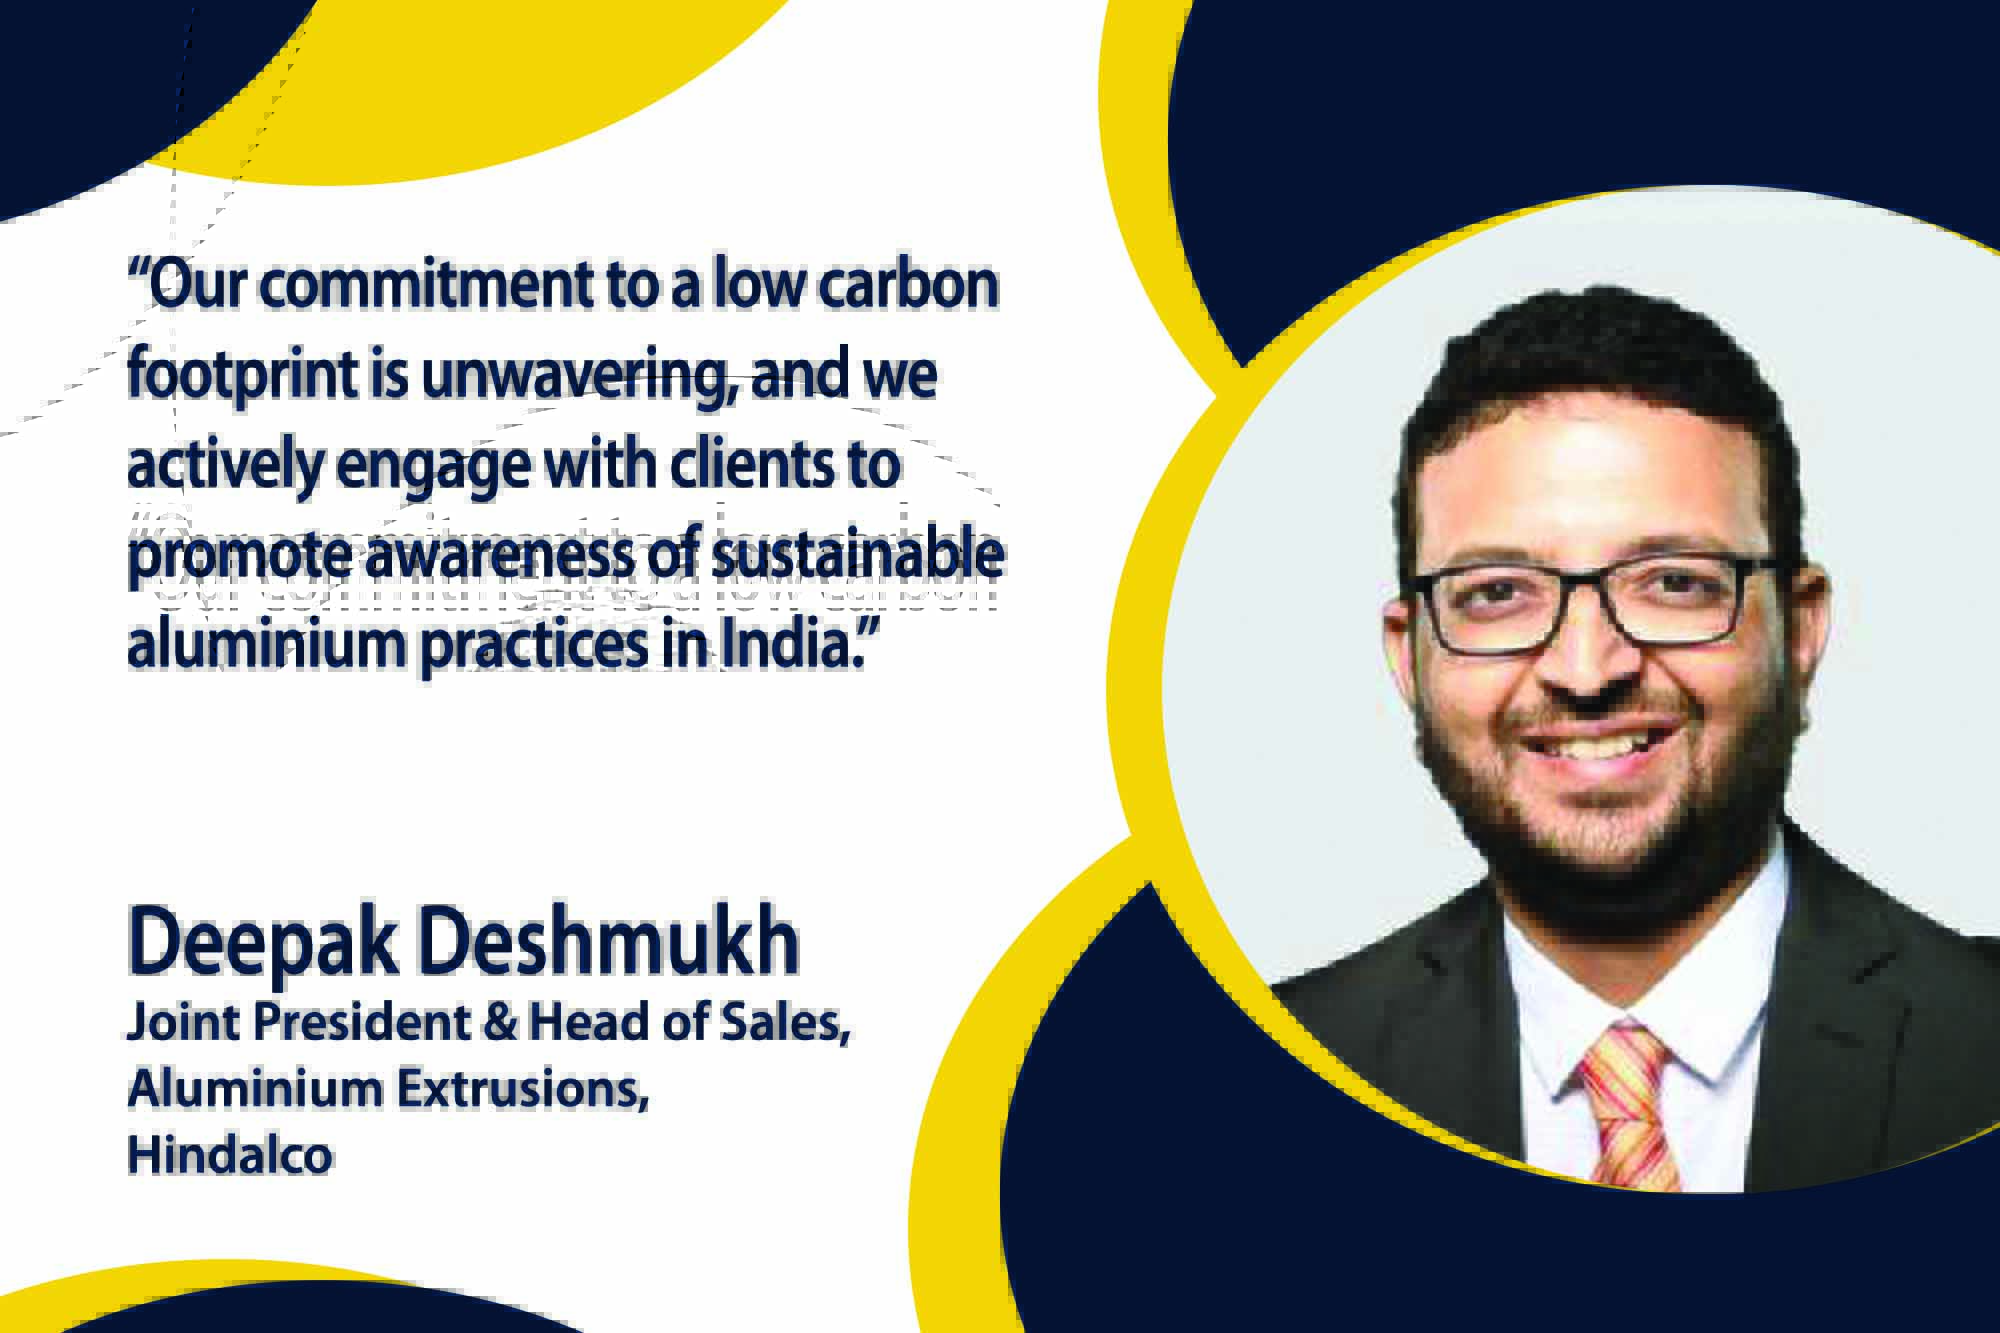 Deepak Deshmukh, Joint President & Head of Sales, Aluminium Extrusions, Hindalco, elucidates how Hindalco ensures operational efficiency and champions sustainability in its manufacturing processes, earning global recognition as a sustainable aluminium industry leader.